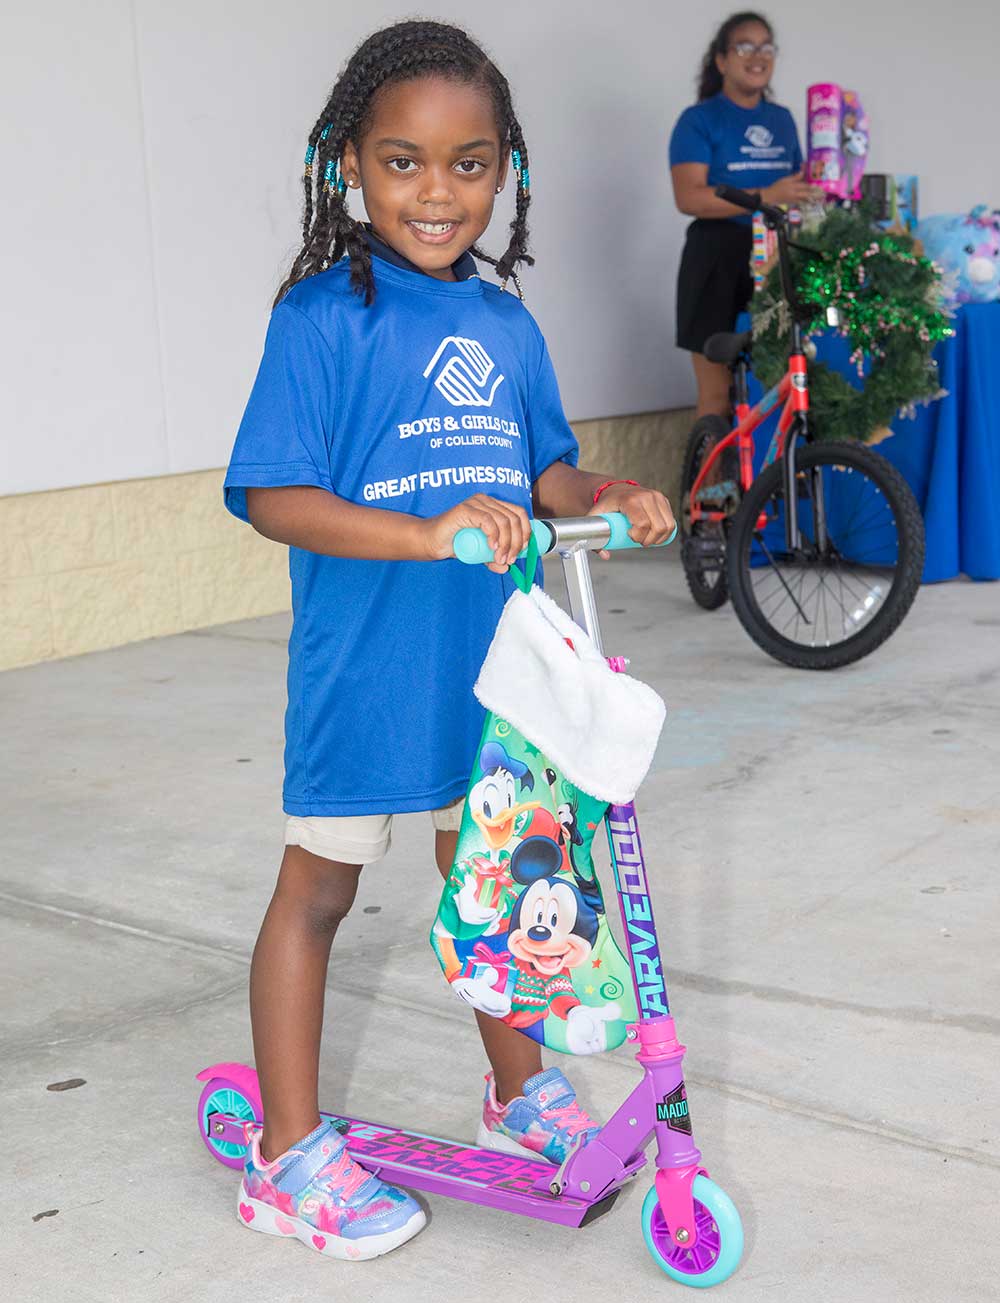 GL Homes donates gifts to Boys & Girls Club of Collier County.